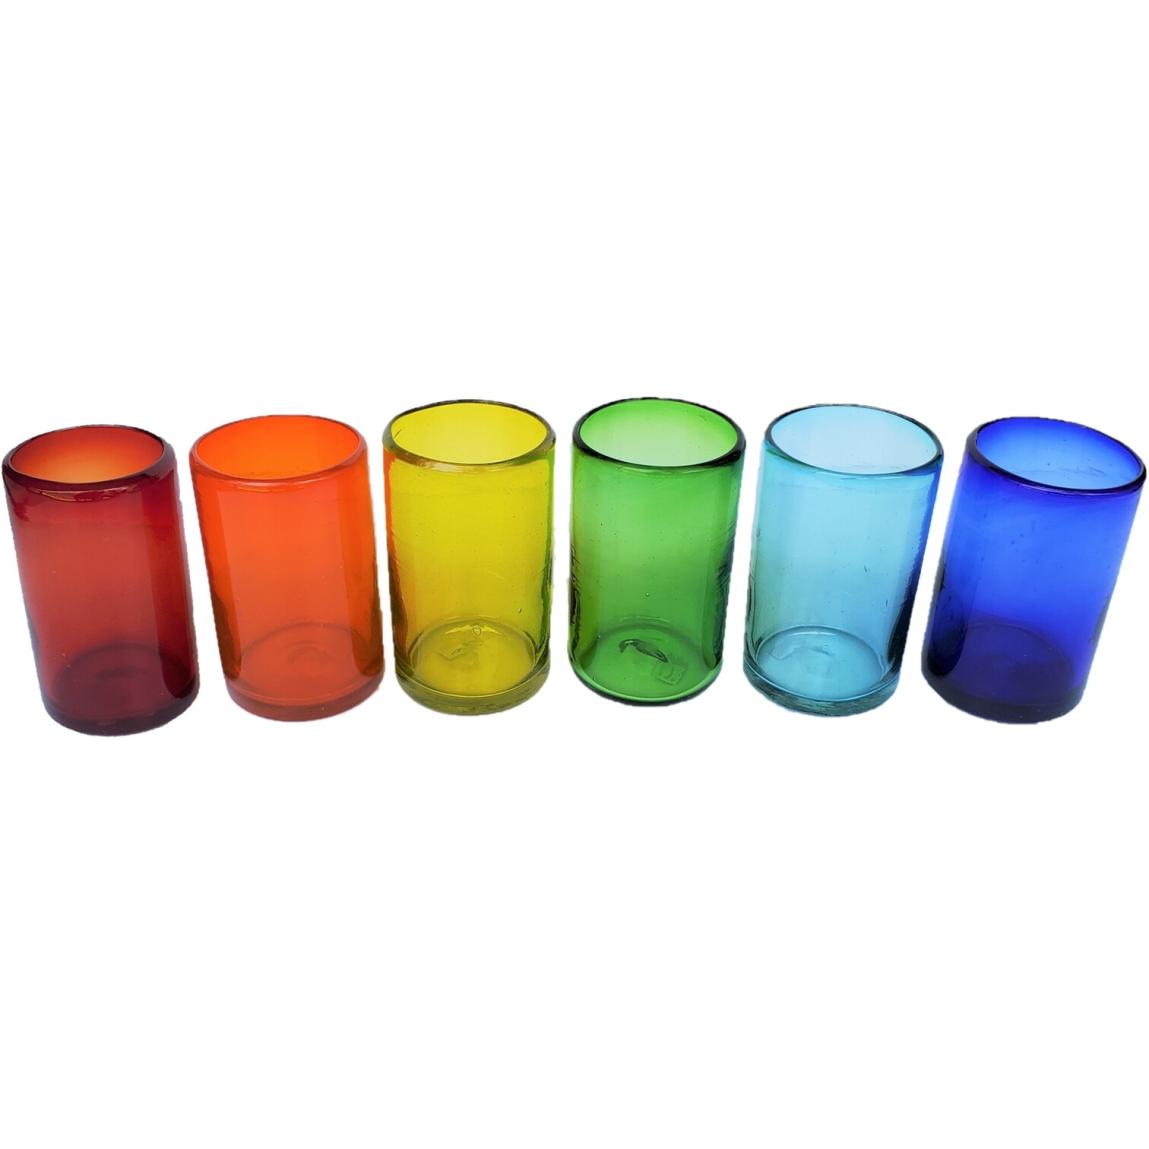 Sale Items / Rainbow Colored 14 oz Drinking Glasses  / These handcrafted glasses deliver a classic touch to your favorite drink.